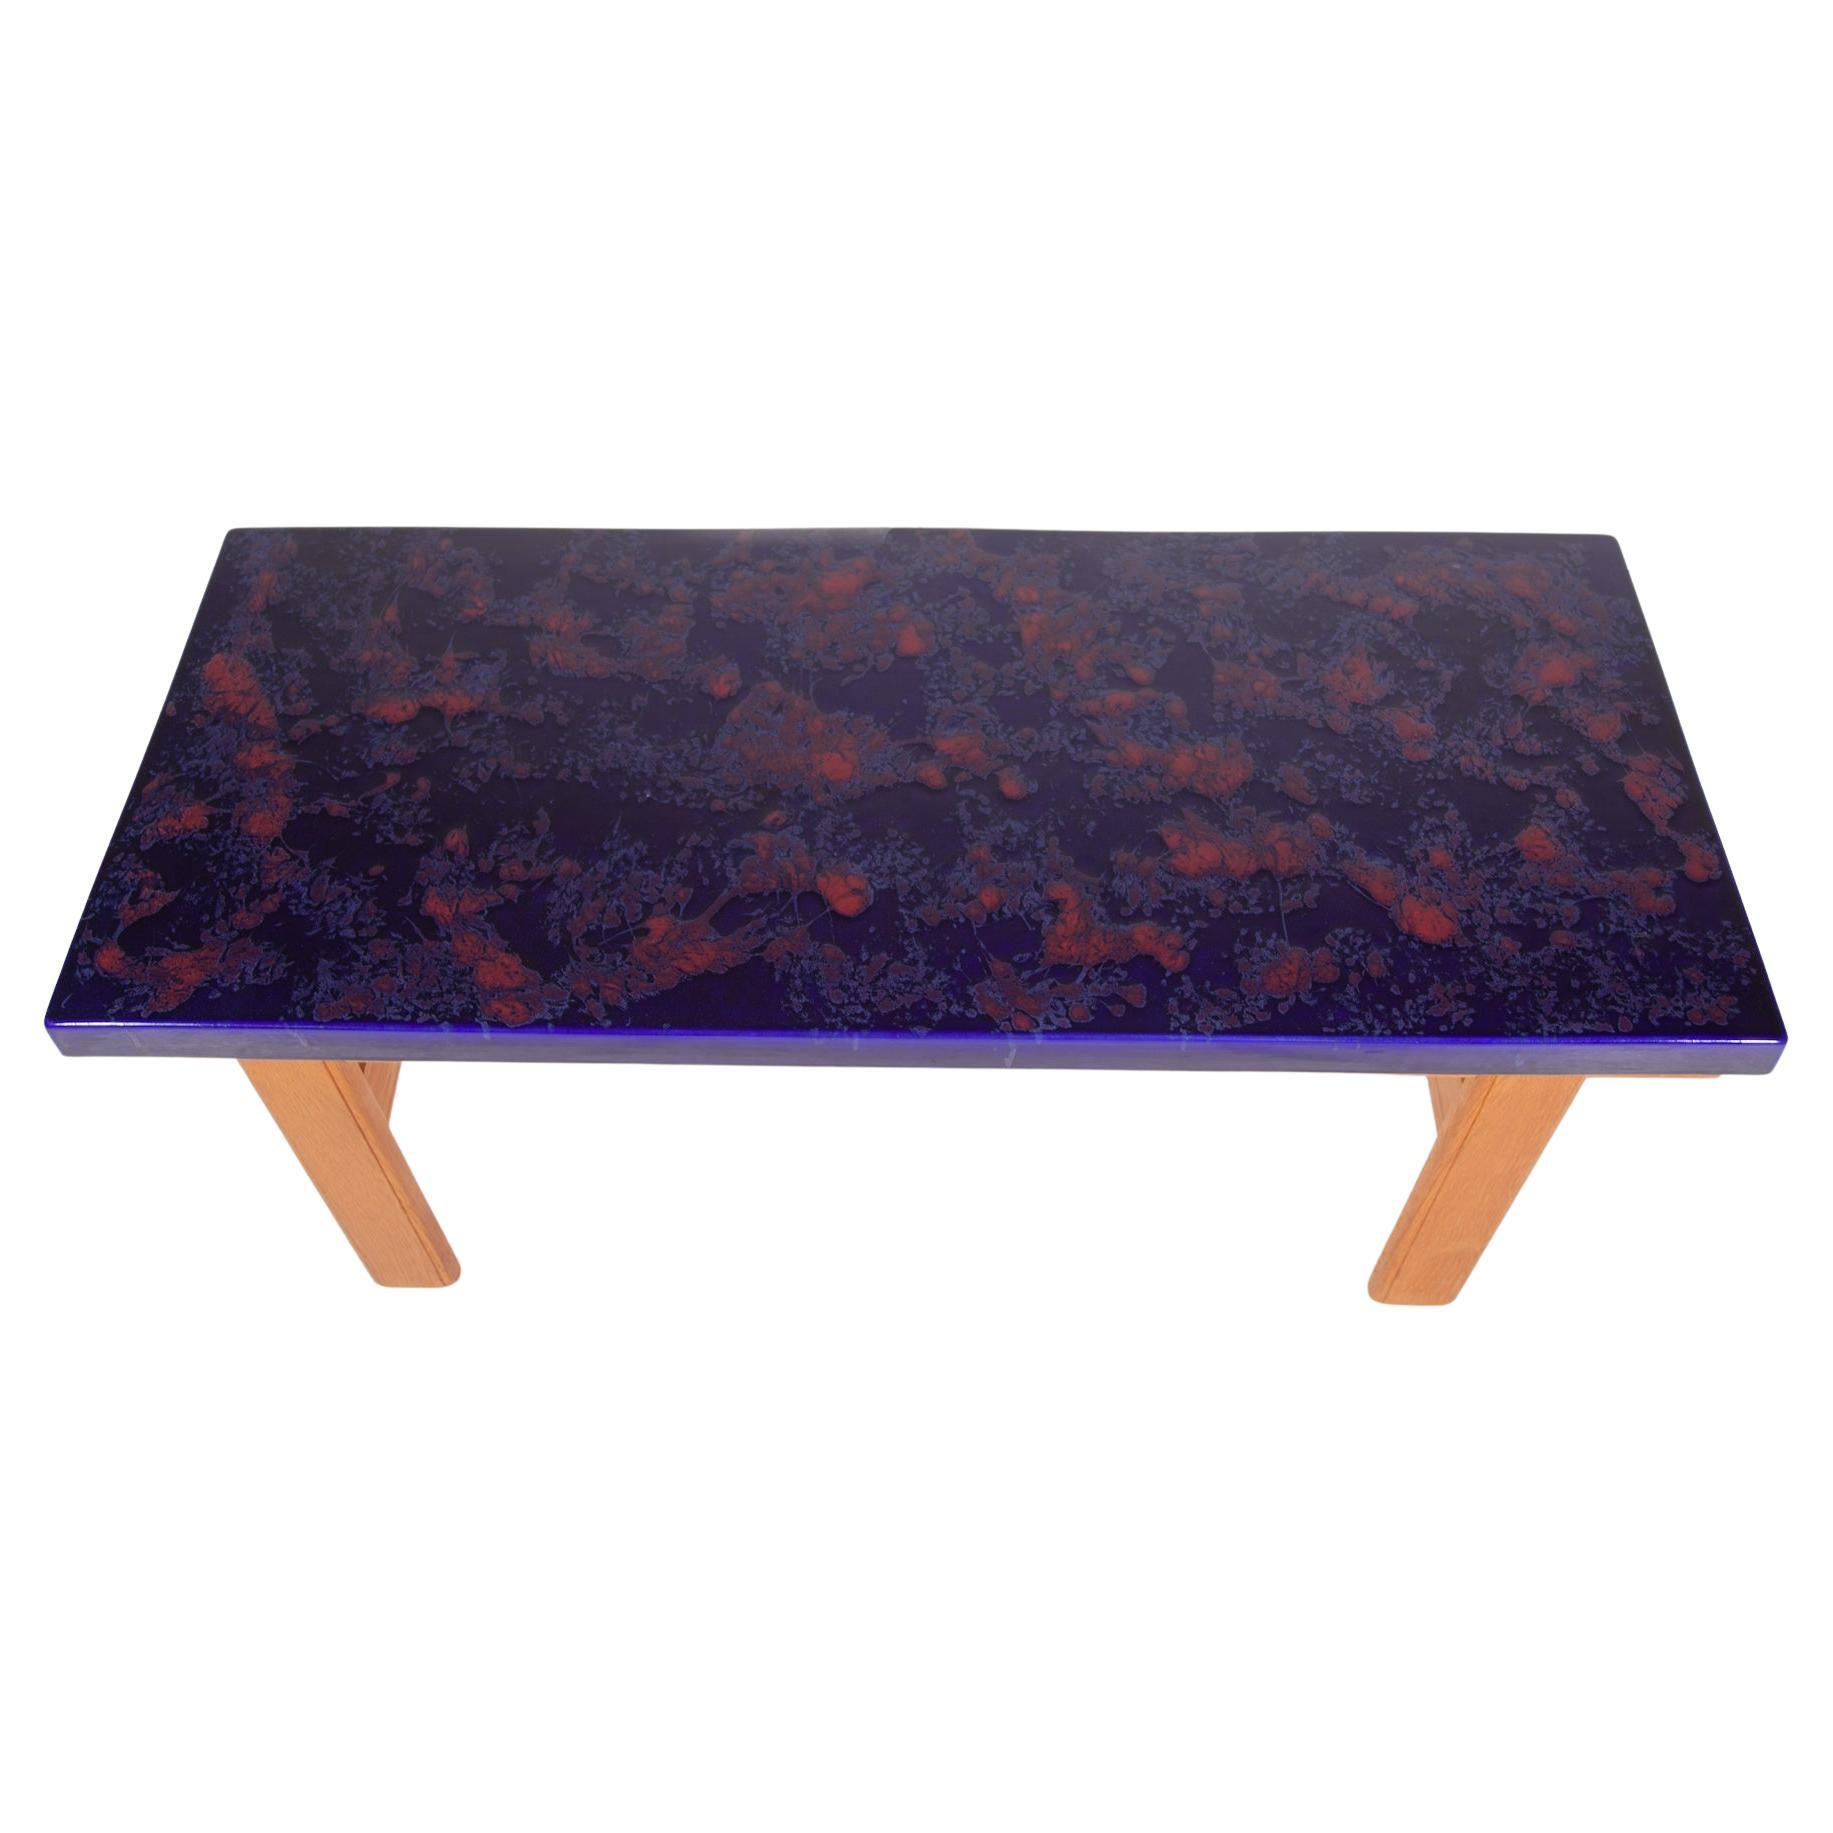 Large Rectangular Top Ceramic Blue and Orange Tile Coffee Table, 1970s For Sale